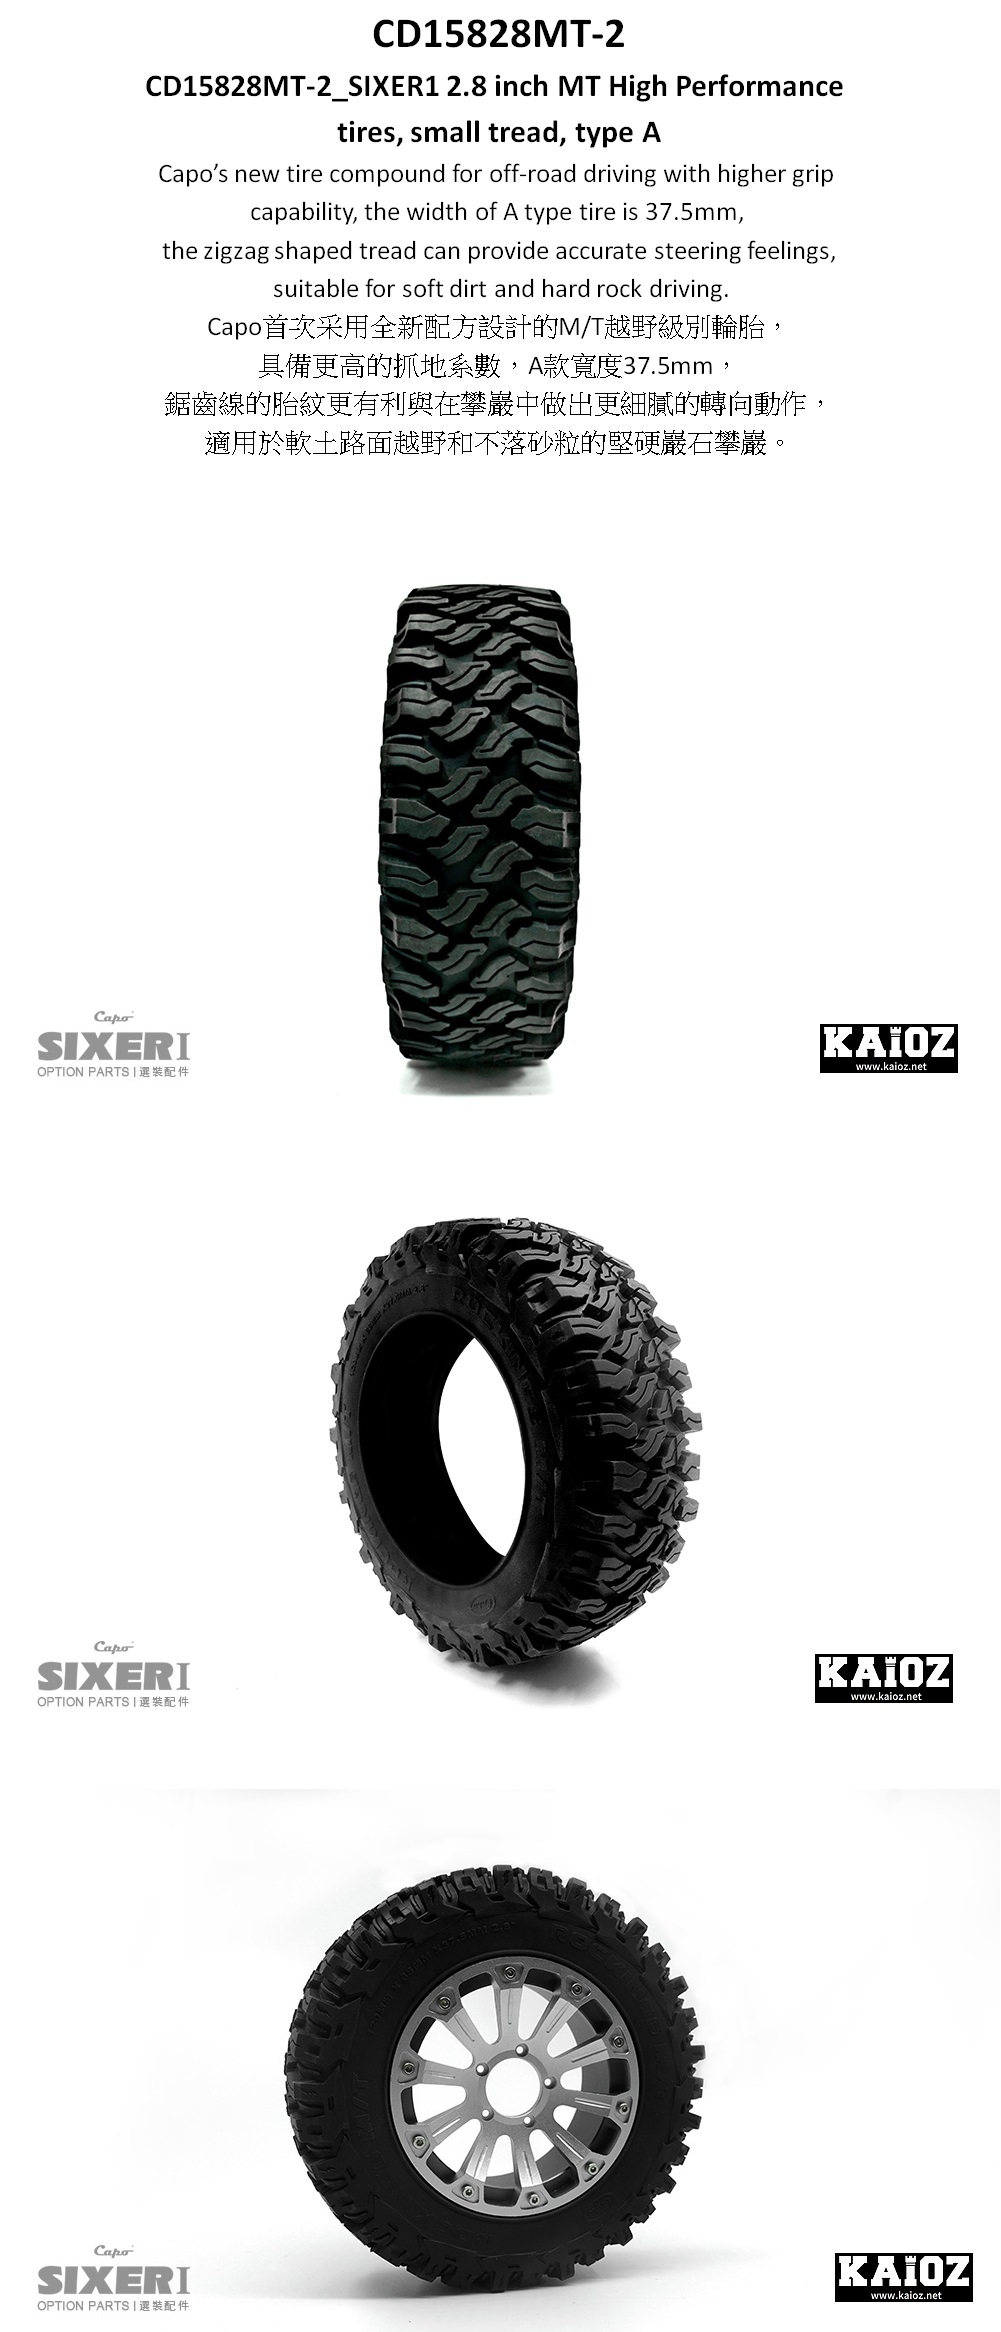 26_CD15828MT-2_SIXER1 2.8 inch MT High Performance tires, small tread, type A.jpg